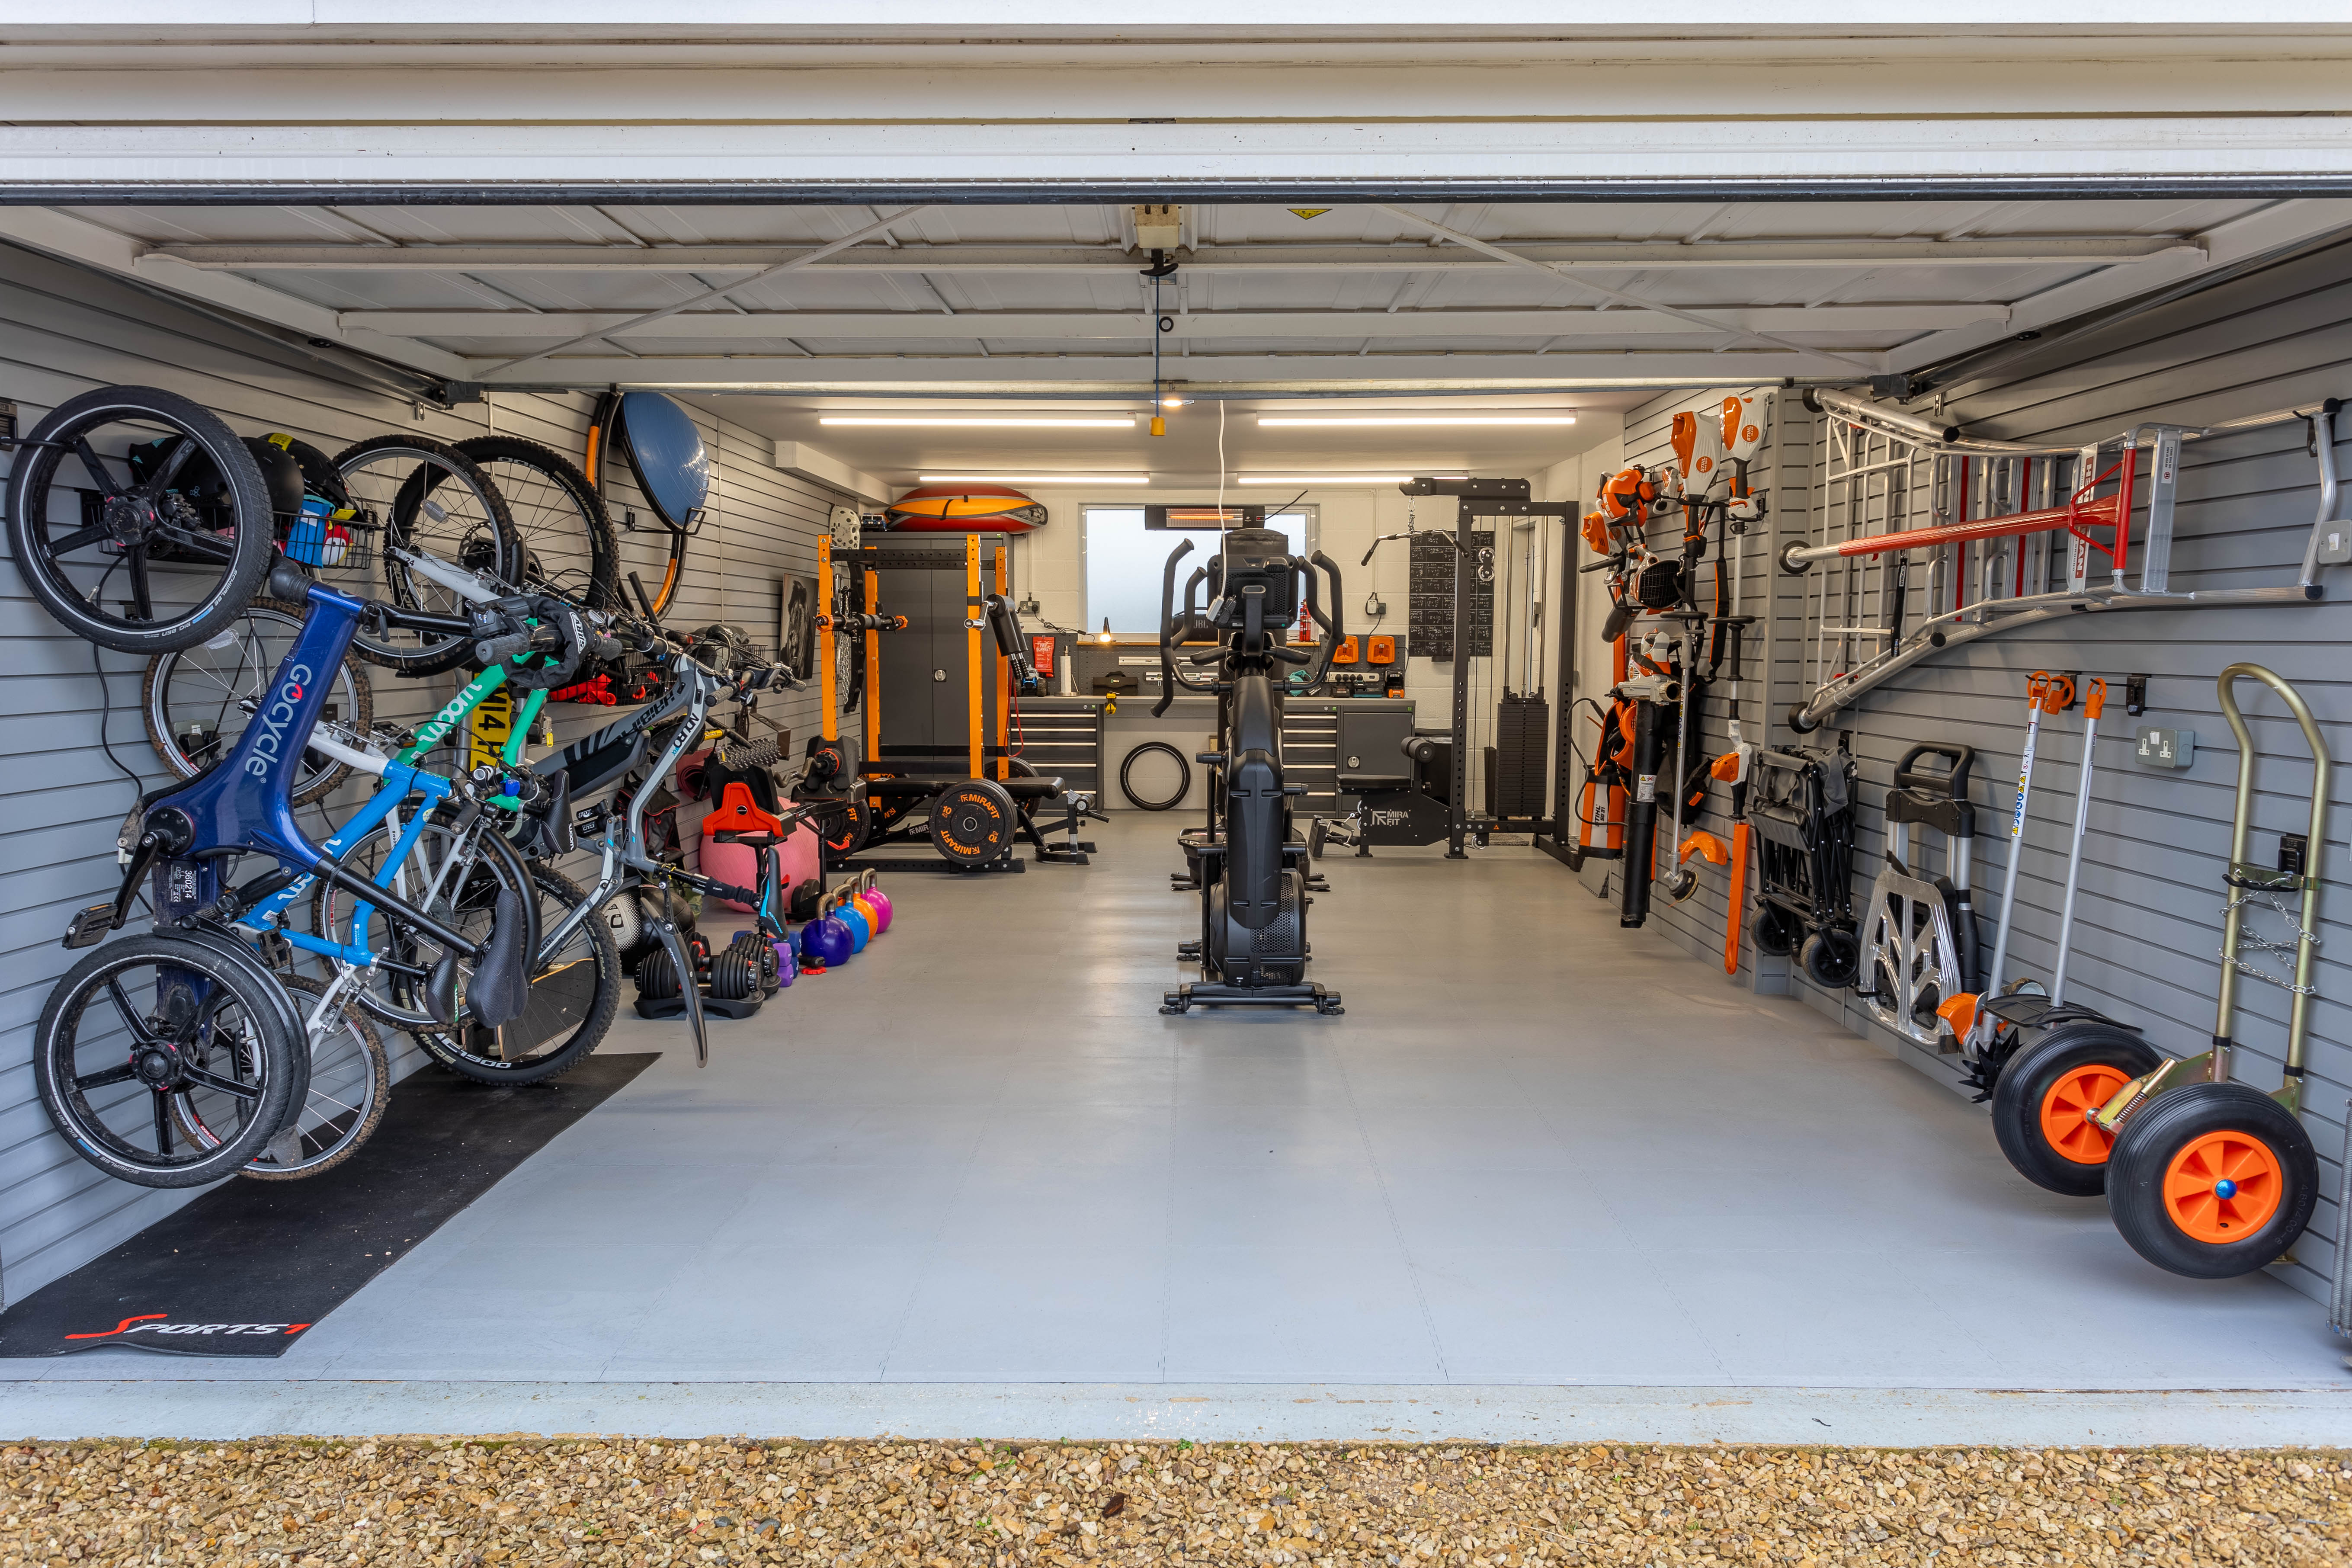 The Final Part Creating Your Perfect Workshop: Garage Design Explained